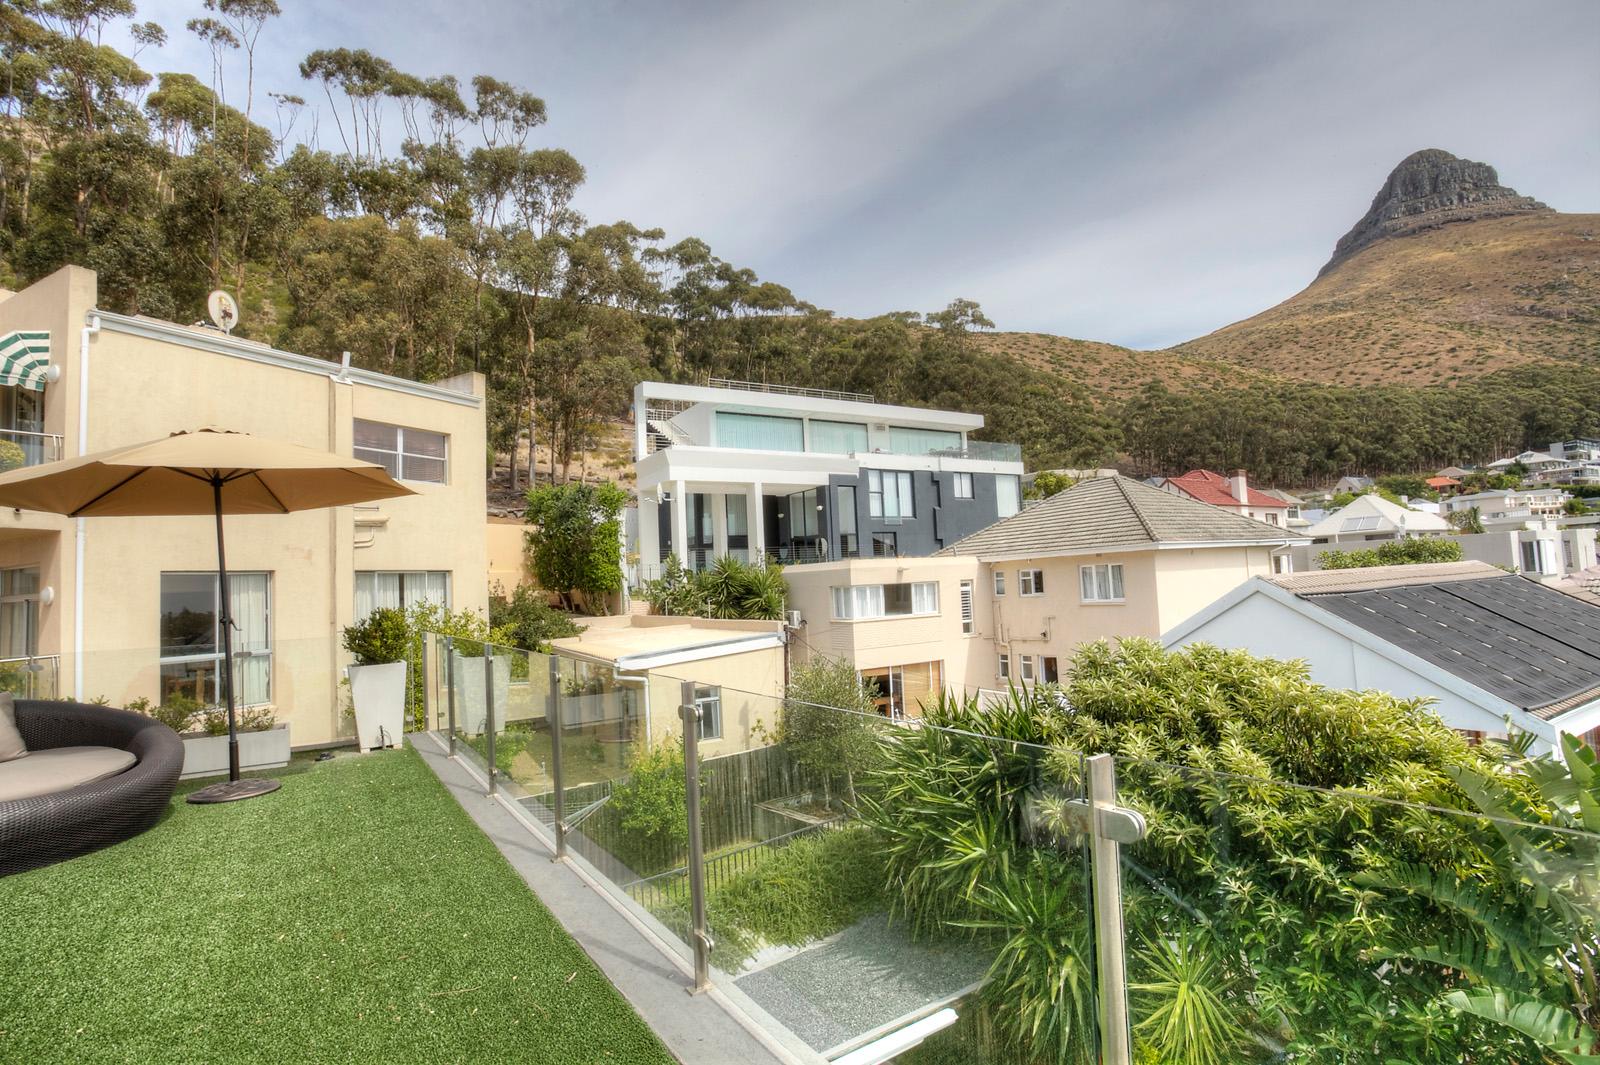 Photo 21 of Bordeaux Villa accommodation in Fresnaye, Cape Town with 4 bedrooms and 3.5 bathrooms